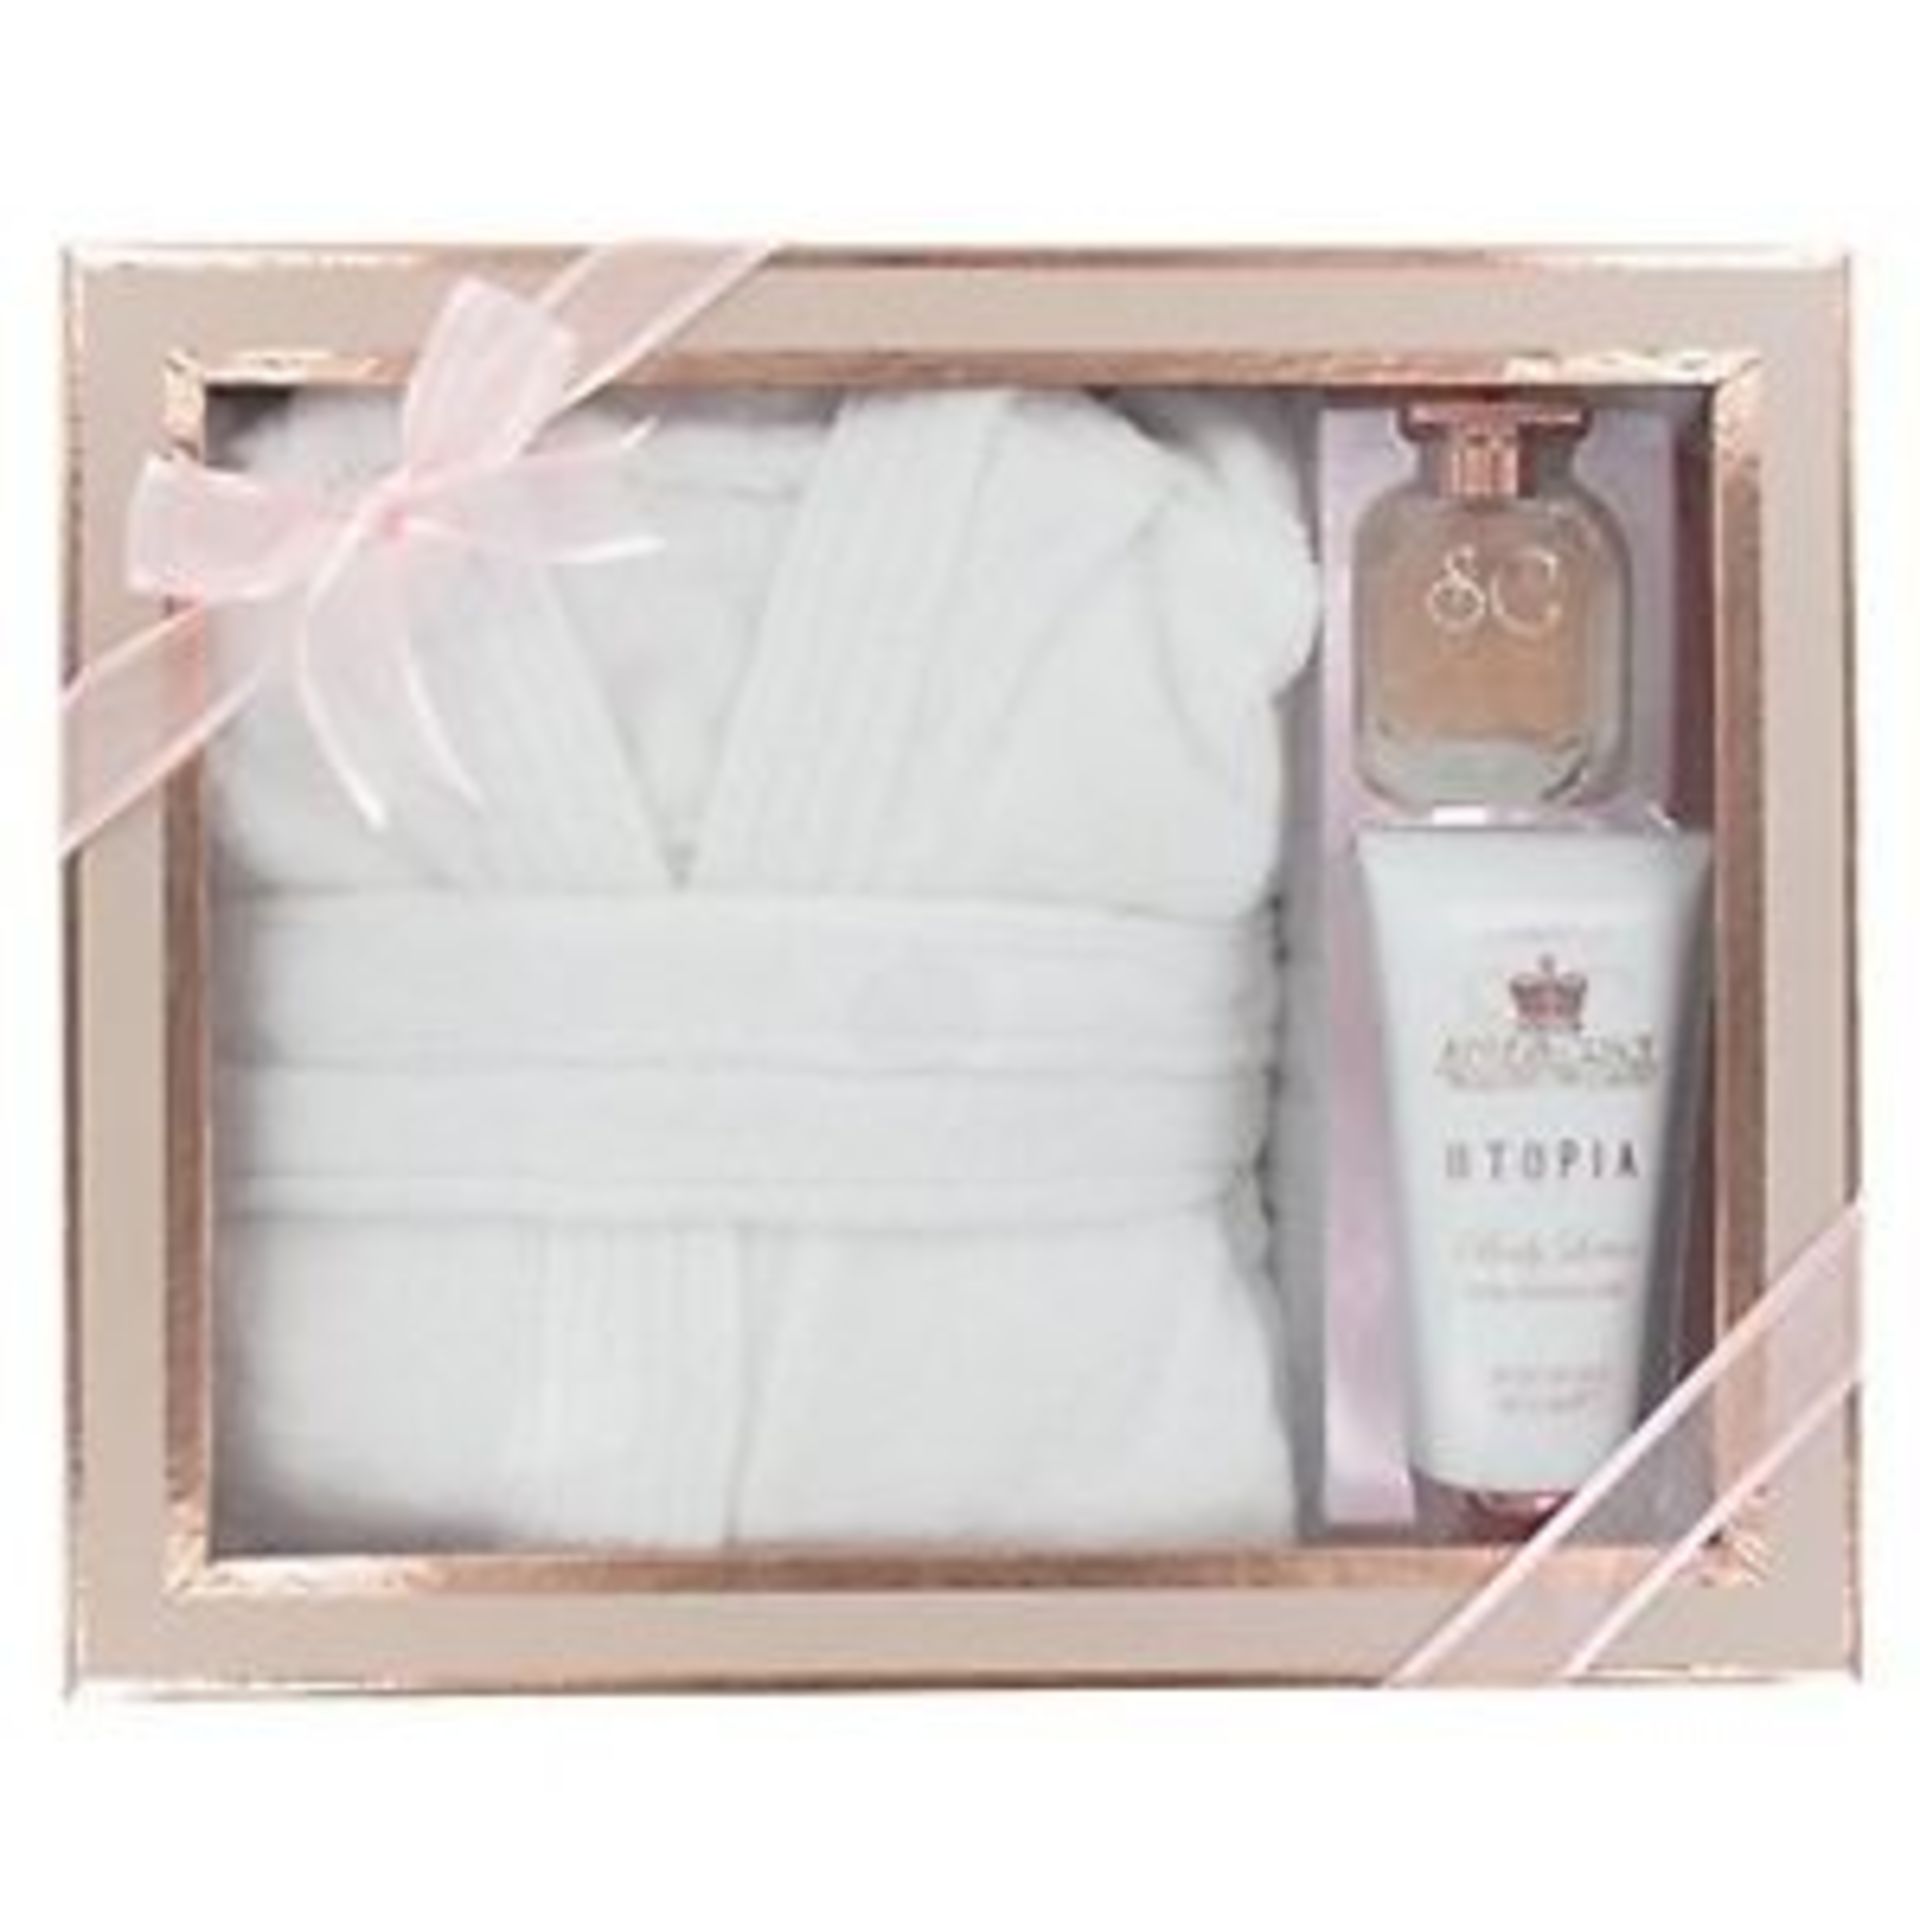 V Brand New Style and Grace Utopia Extravagant Robe Gift Set X 3 Bid price to be multiplied by